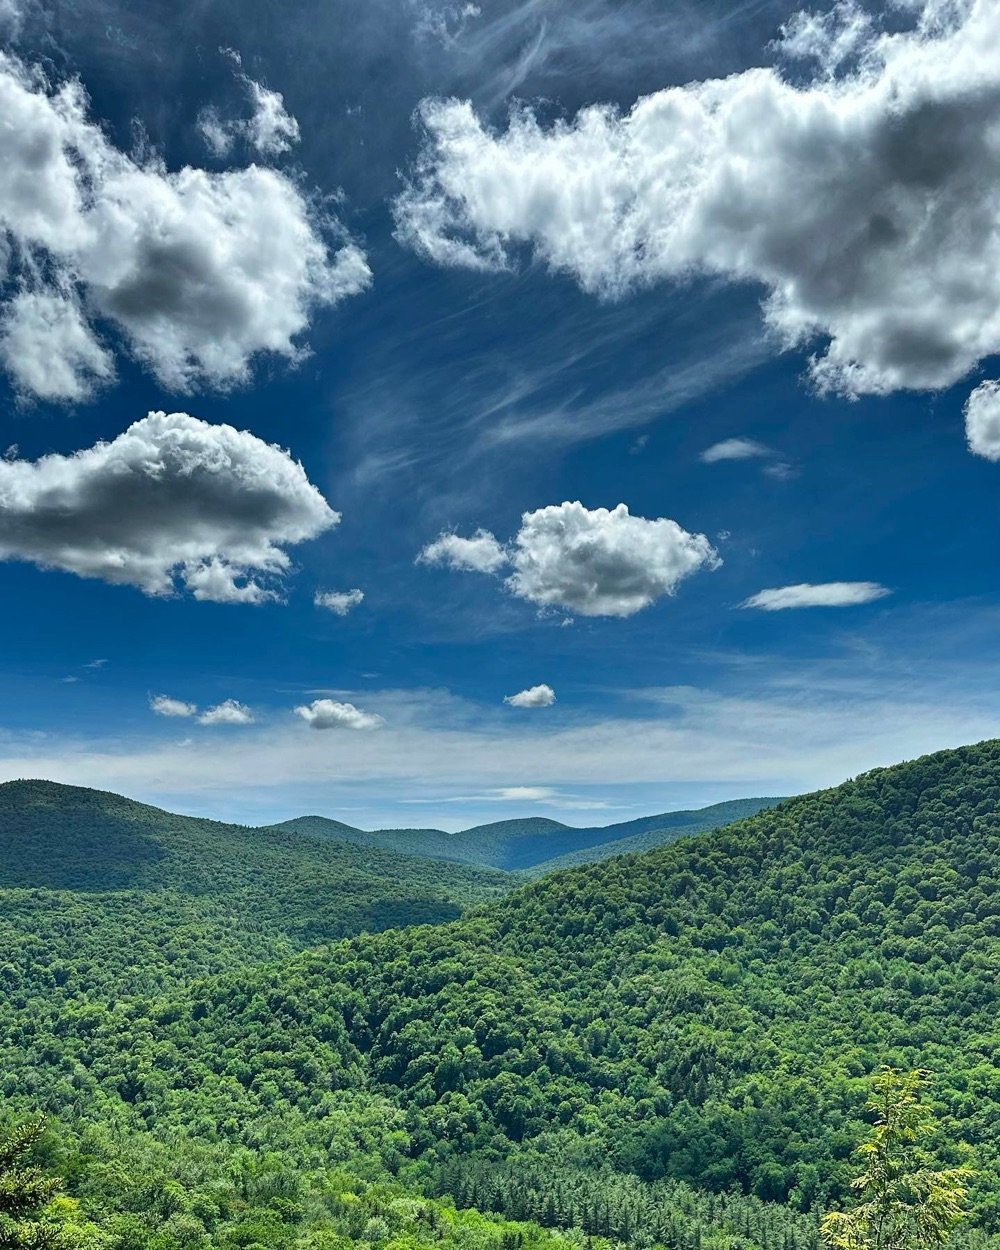 view of the green rolling hills of Vermont under a mostly sunny sky